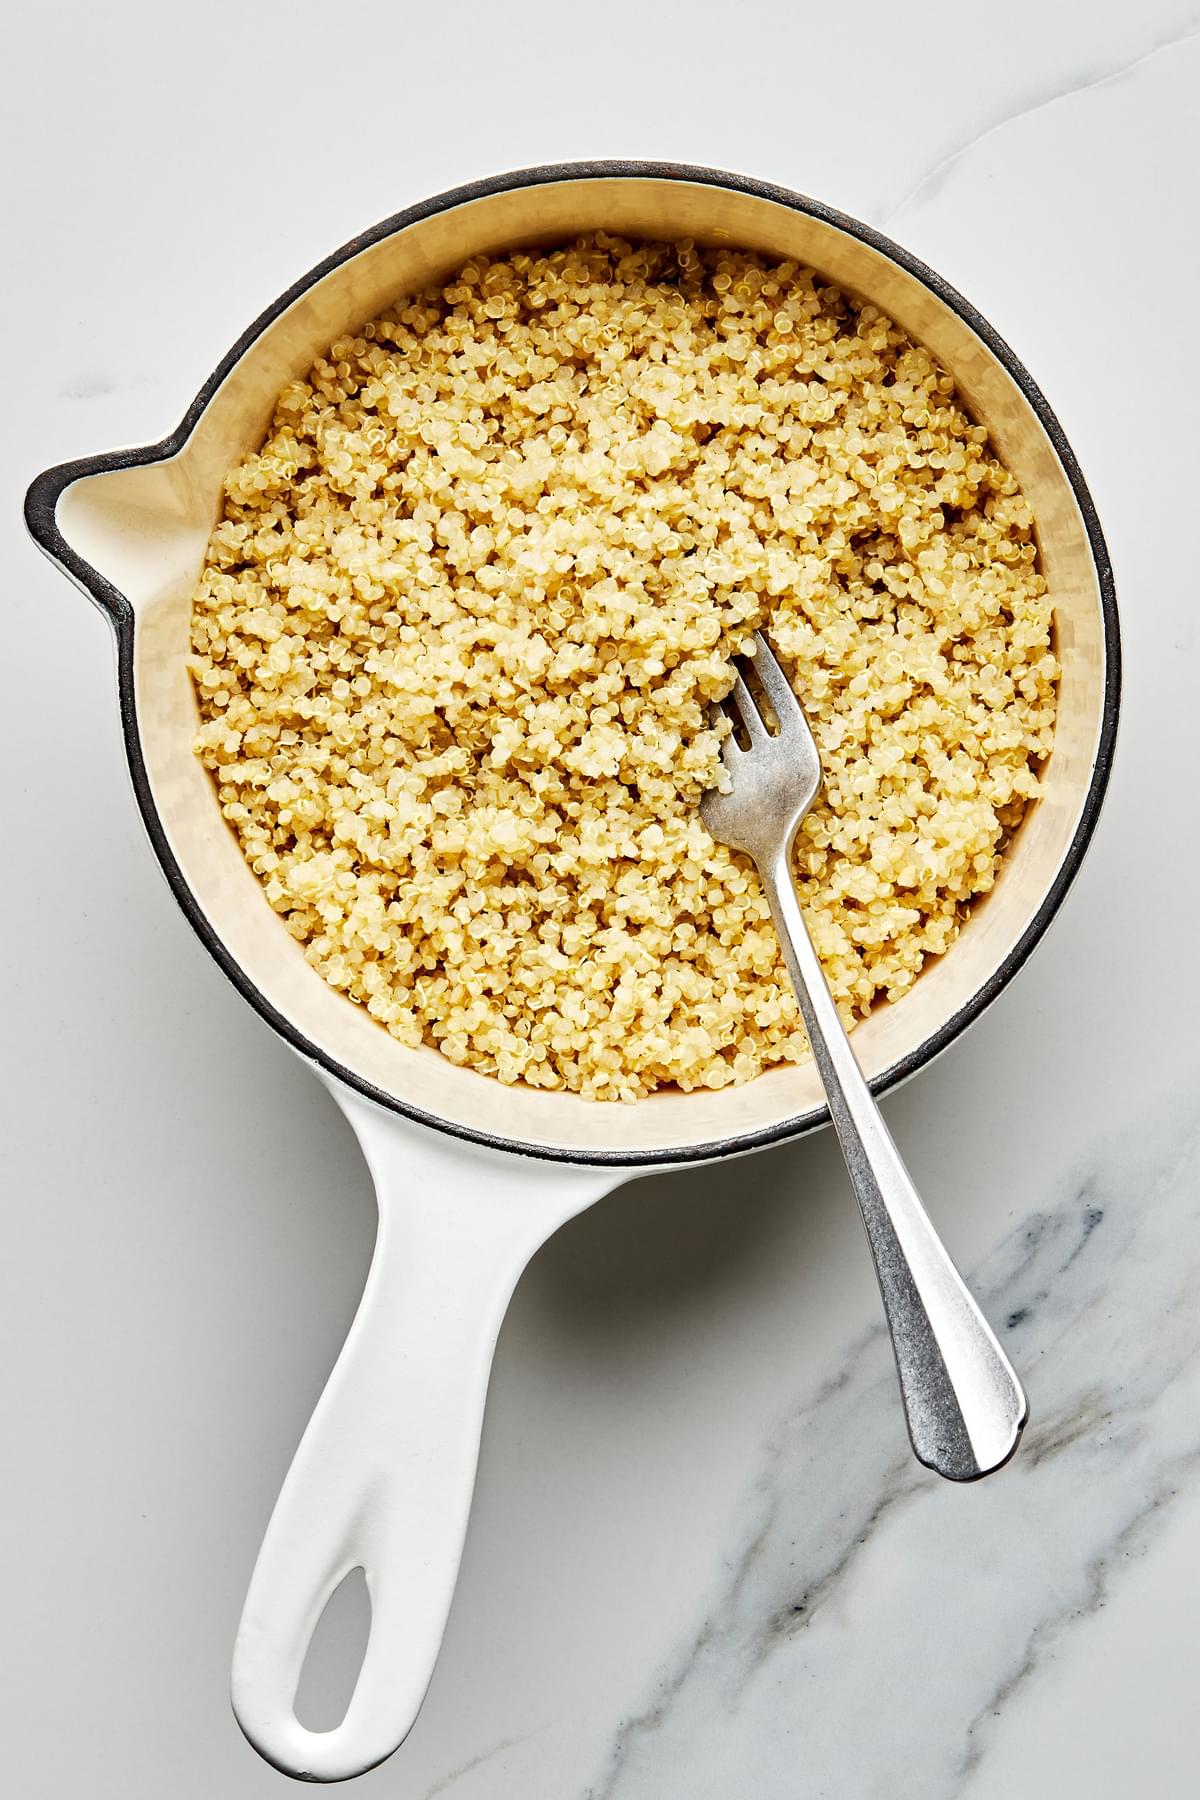 perfectly cooked, fluffy, white quinoa in a small sauce pan being fluffed with a fork